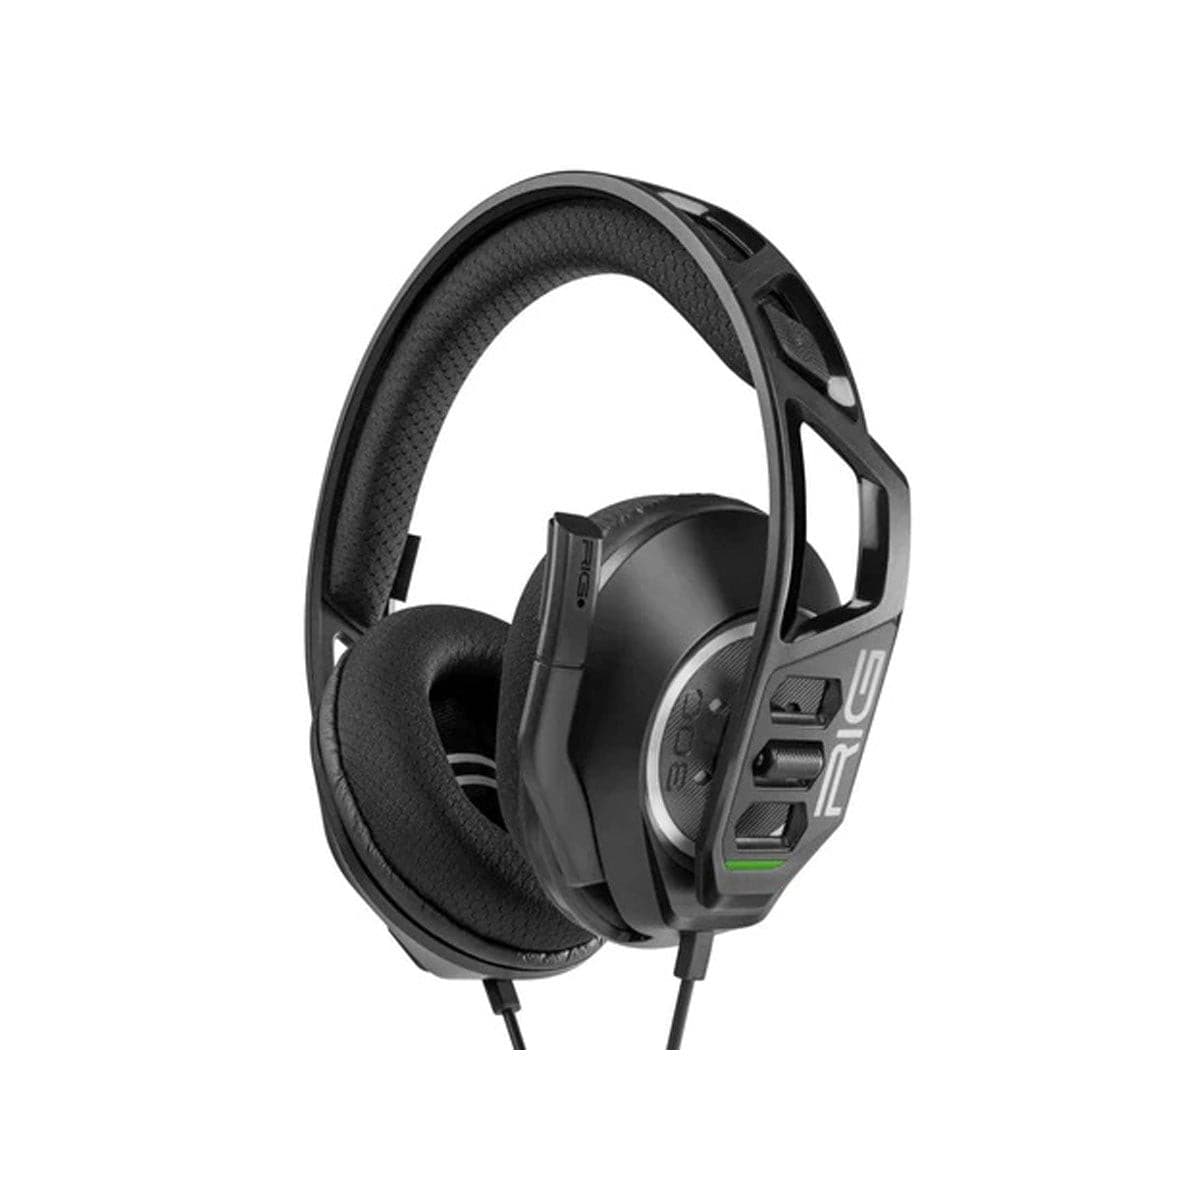 Rig 300 Pro HX Gaming Headset for Xbox Series X|S - Black.